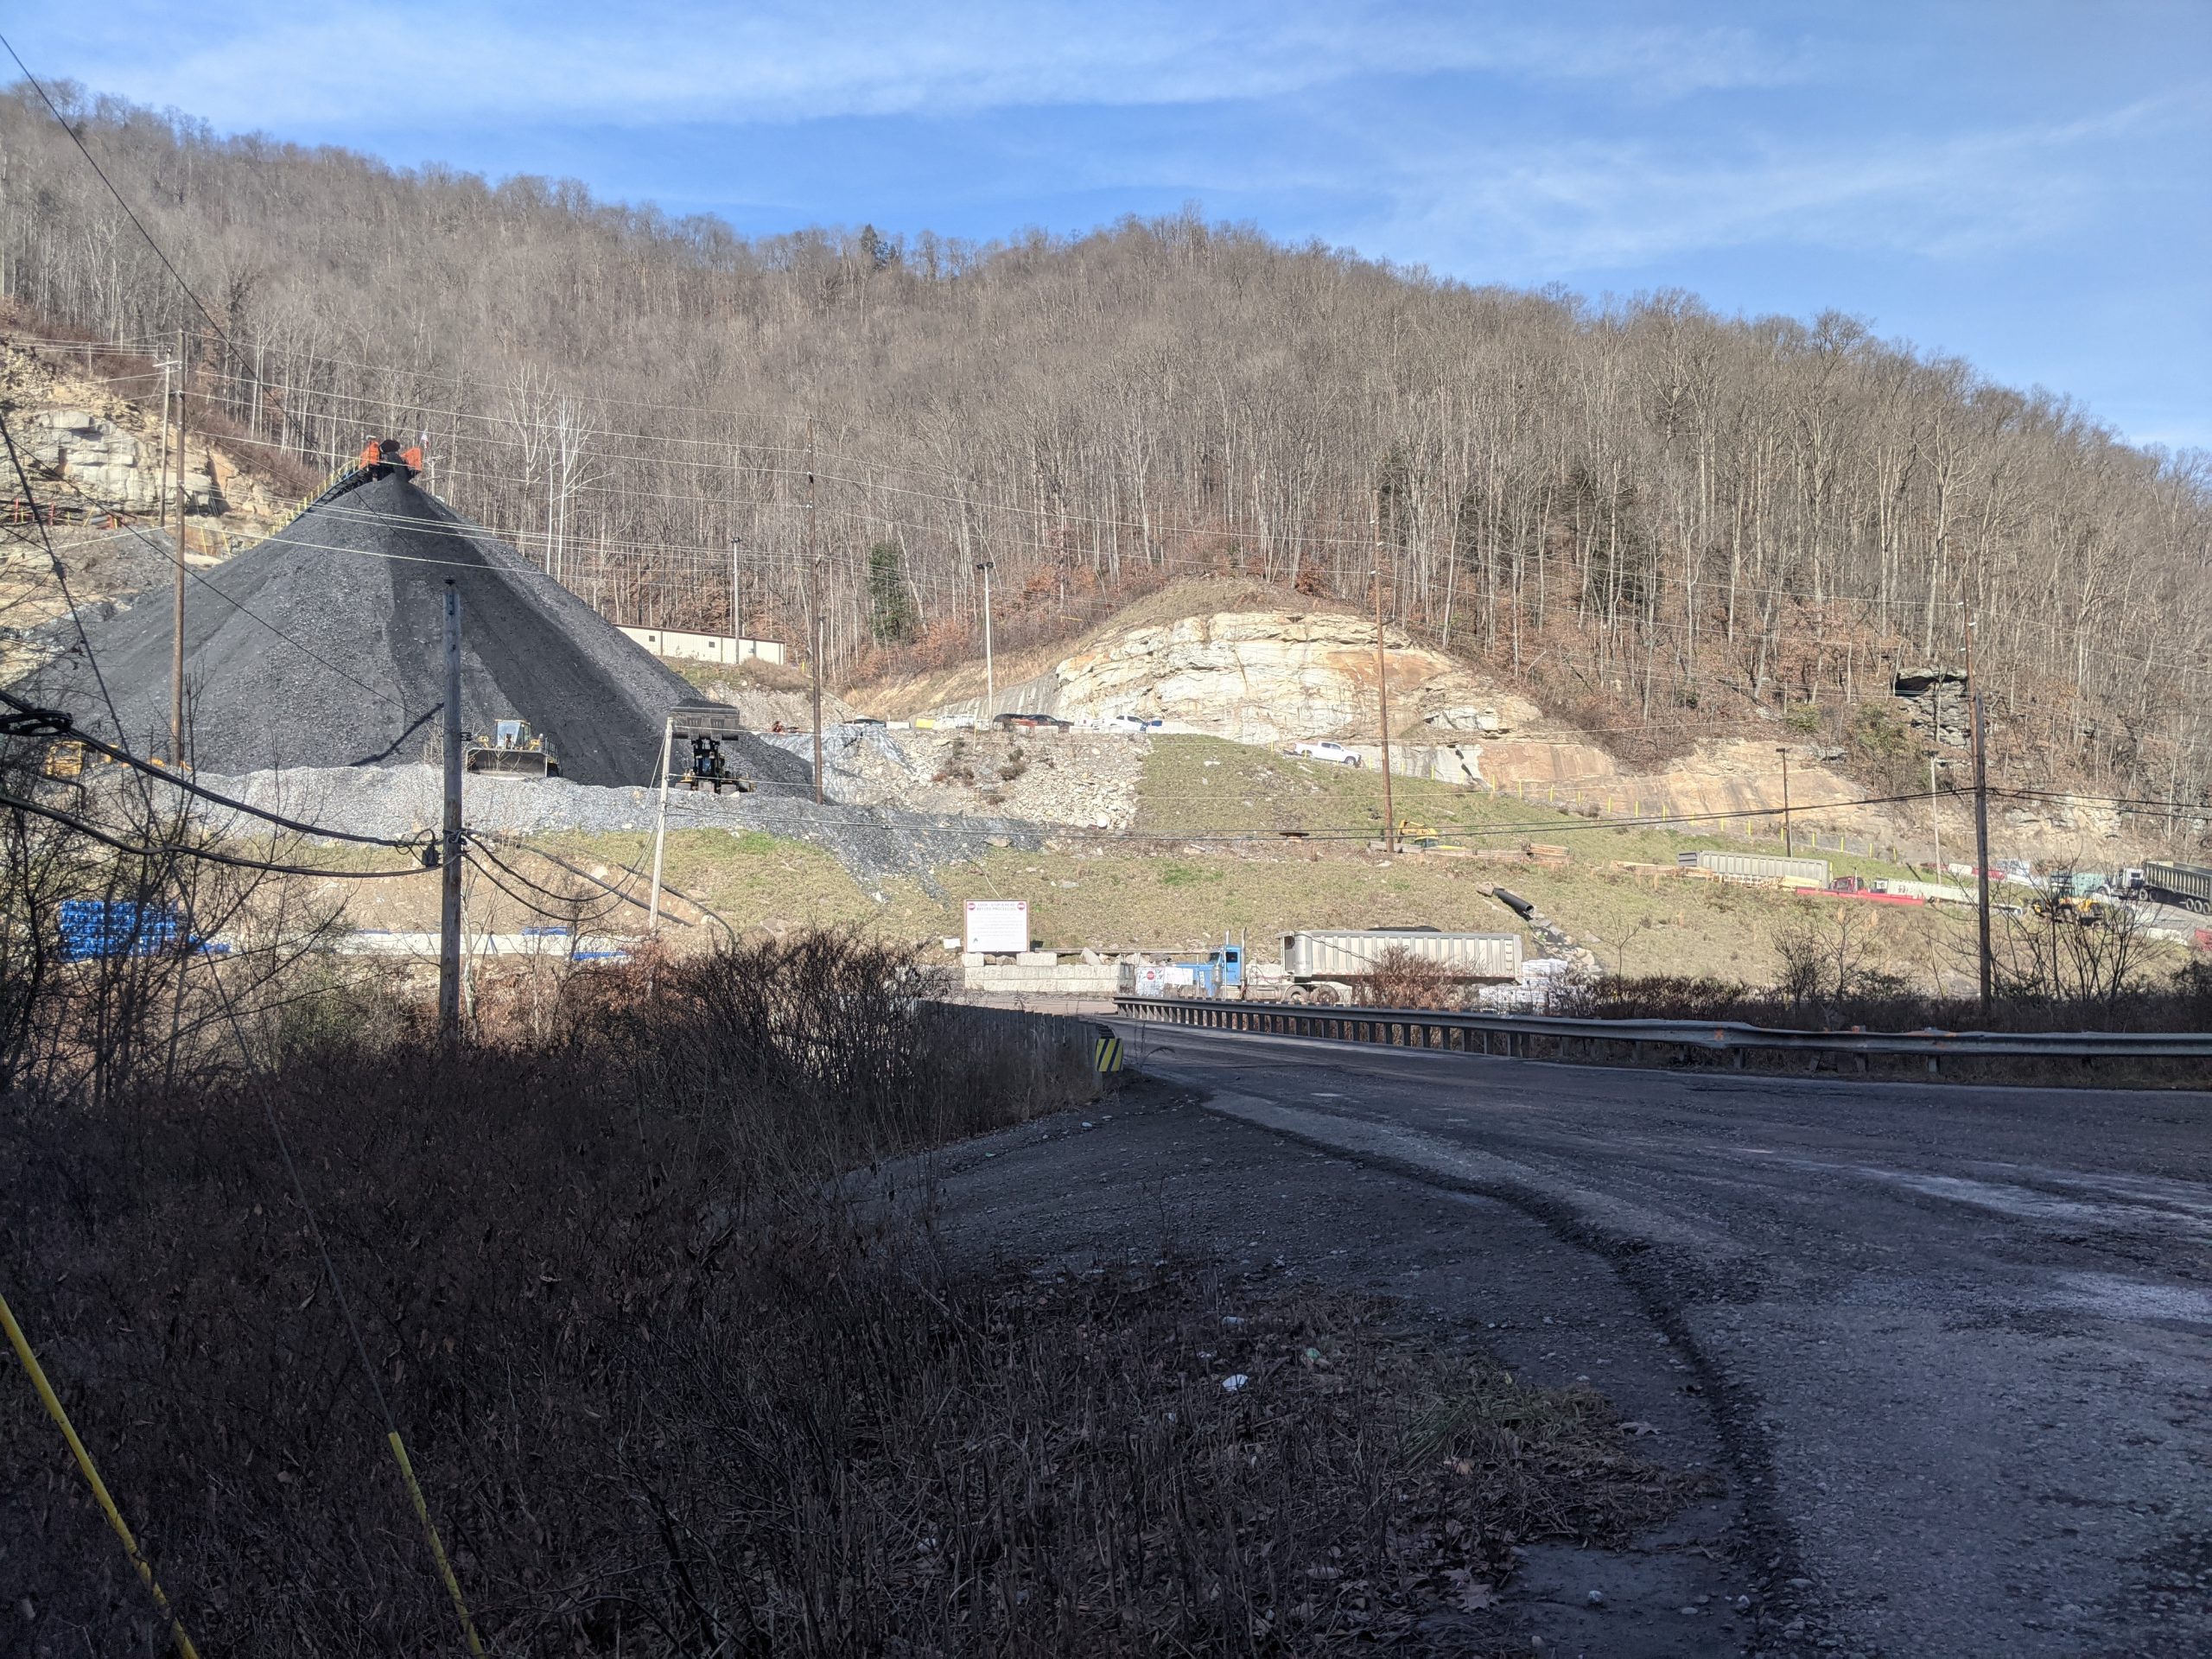 The stockpile area at the Black Eagle Deep Mine sits just a few hundred feet from the heavily traveled haul road used to transport coal away from the site. Photo by Willie Dodson